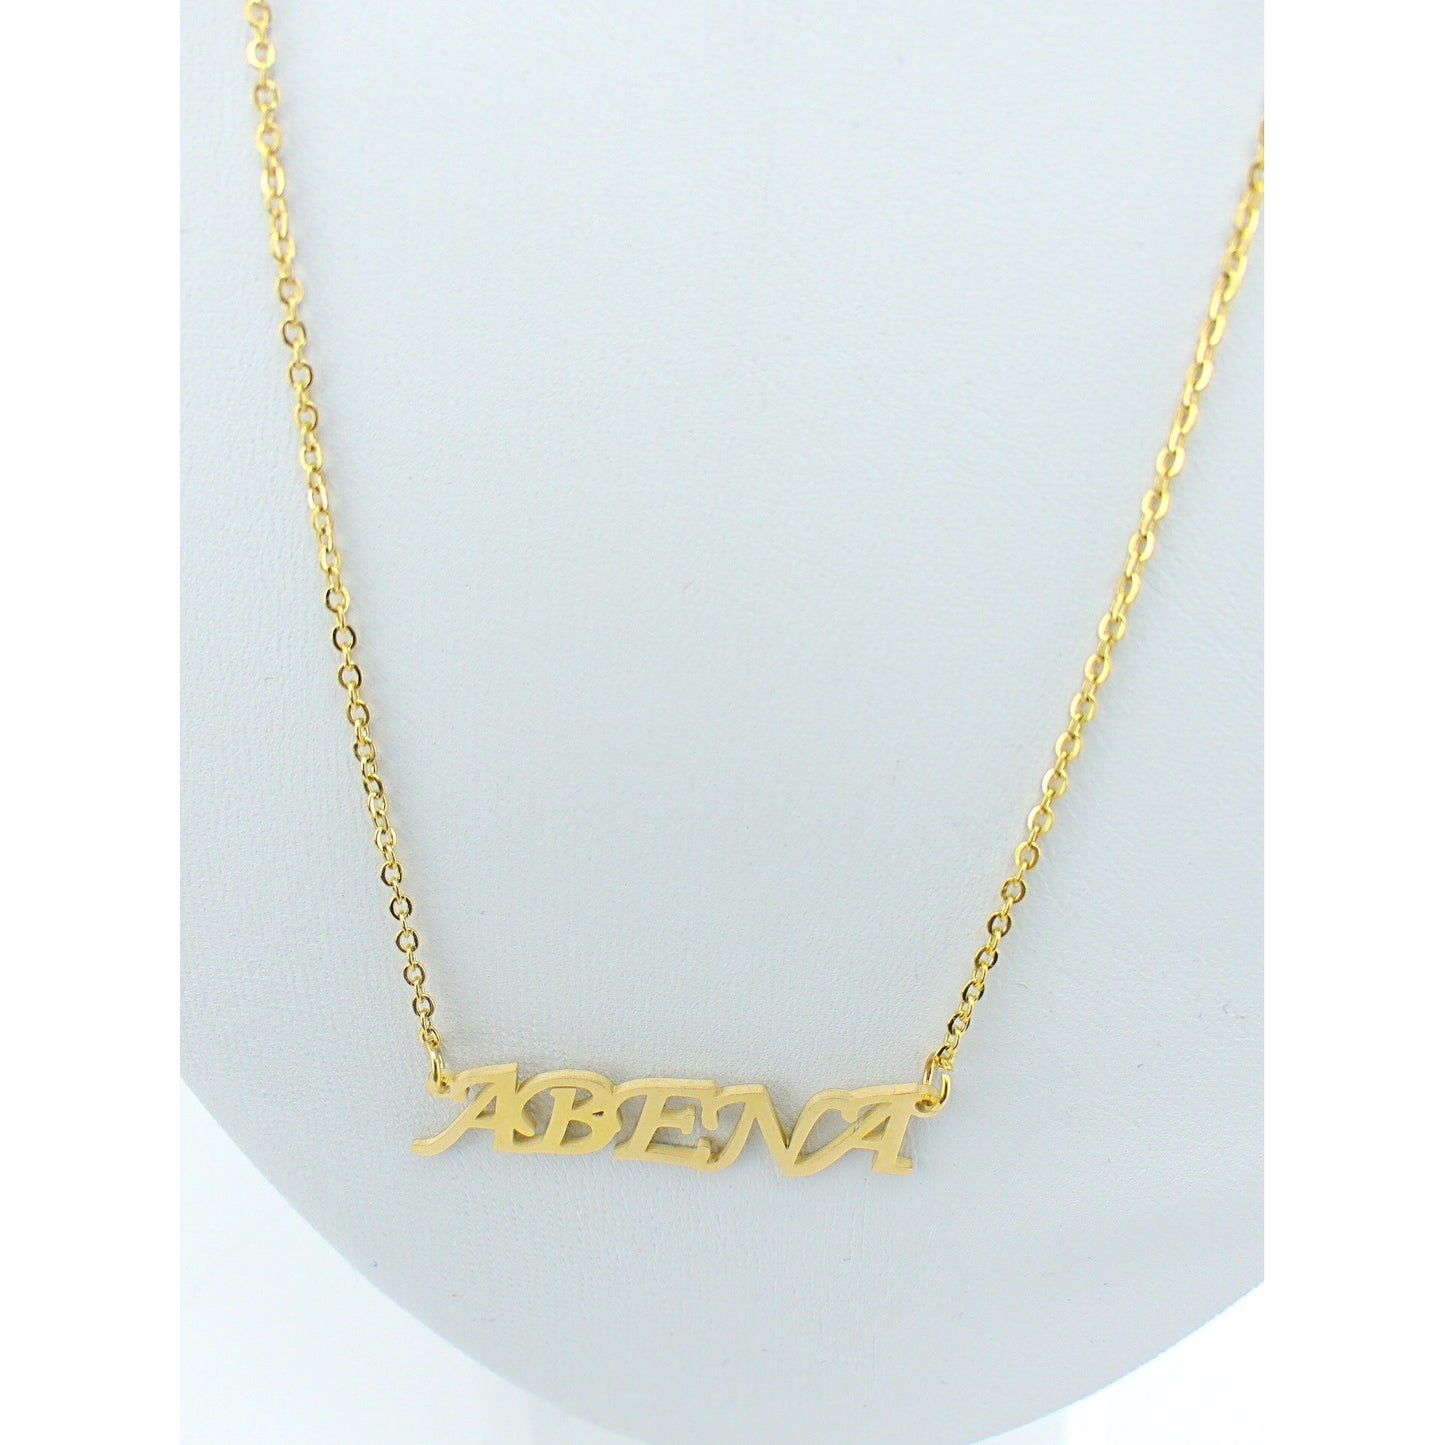 Day Name Necklace